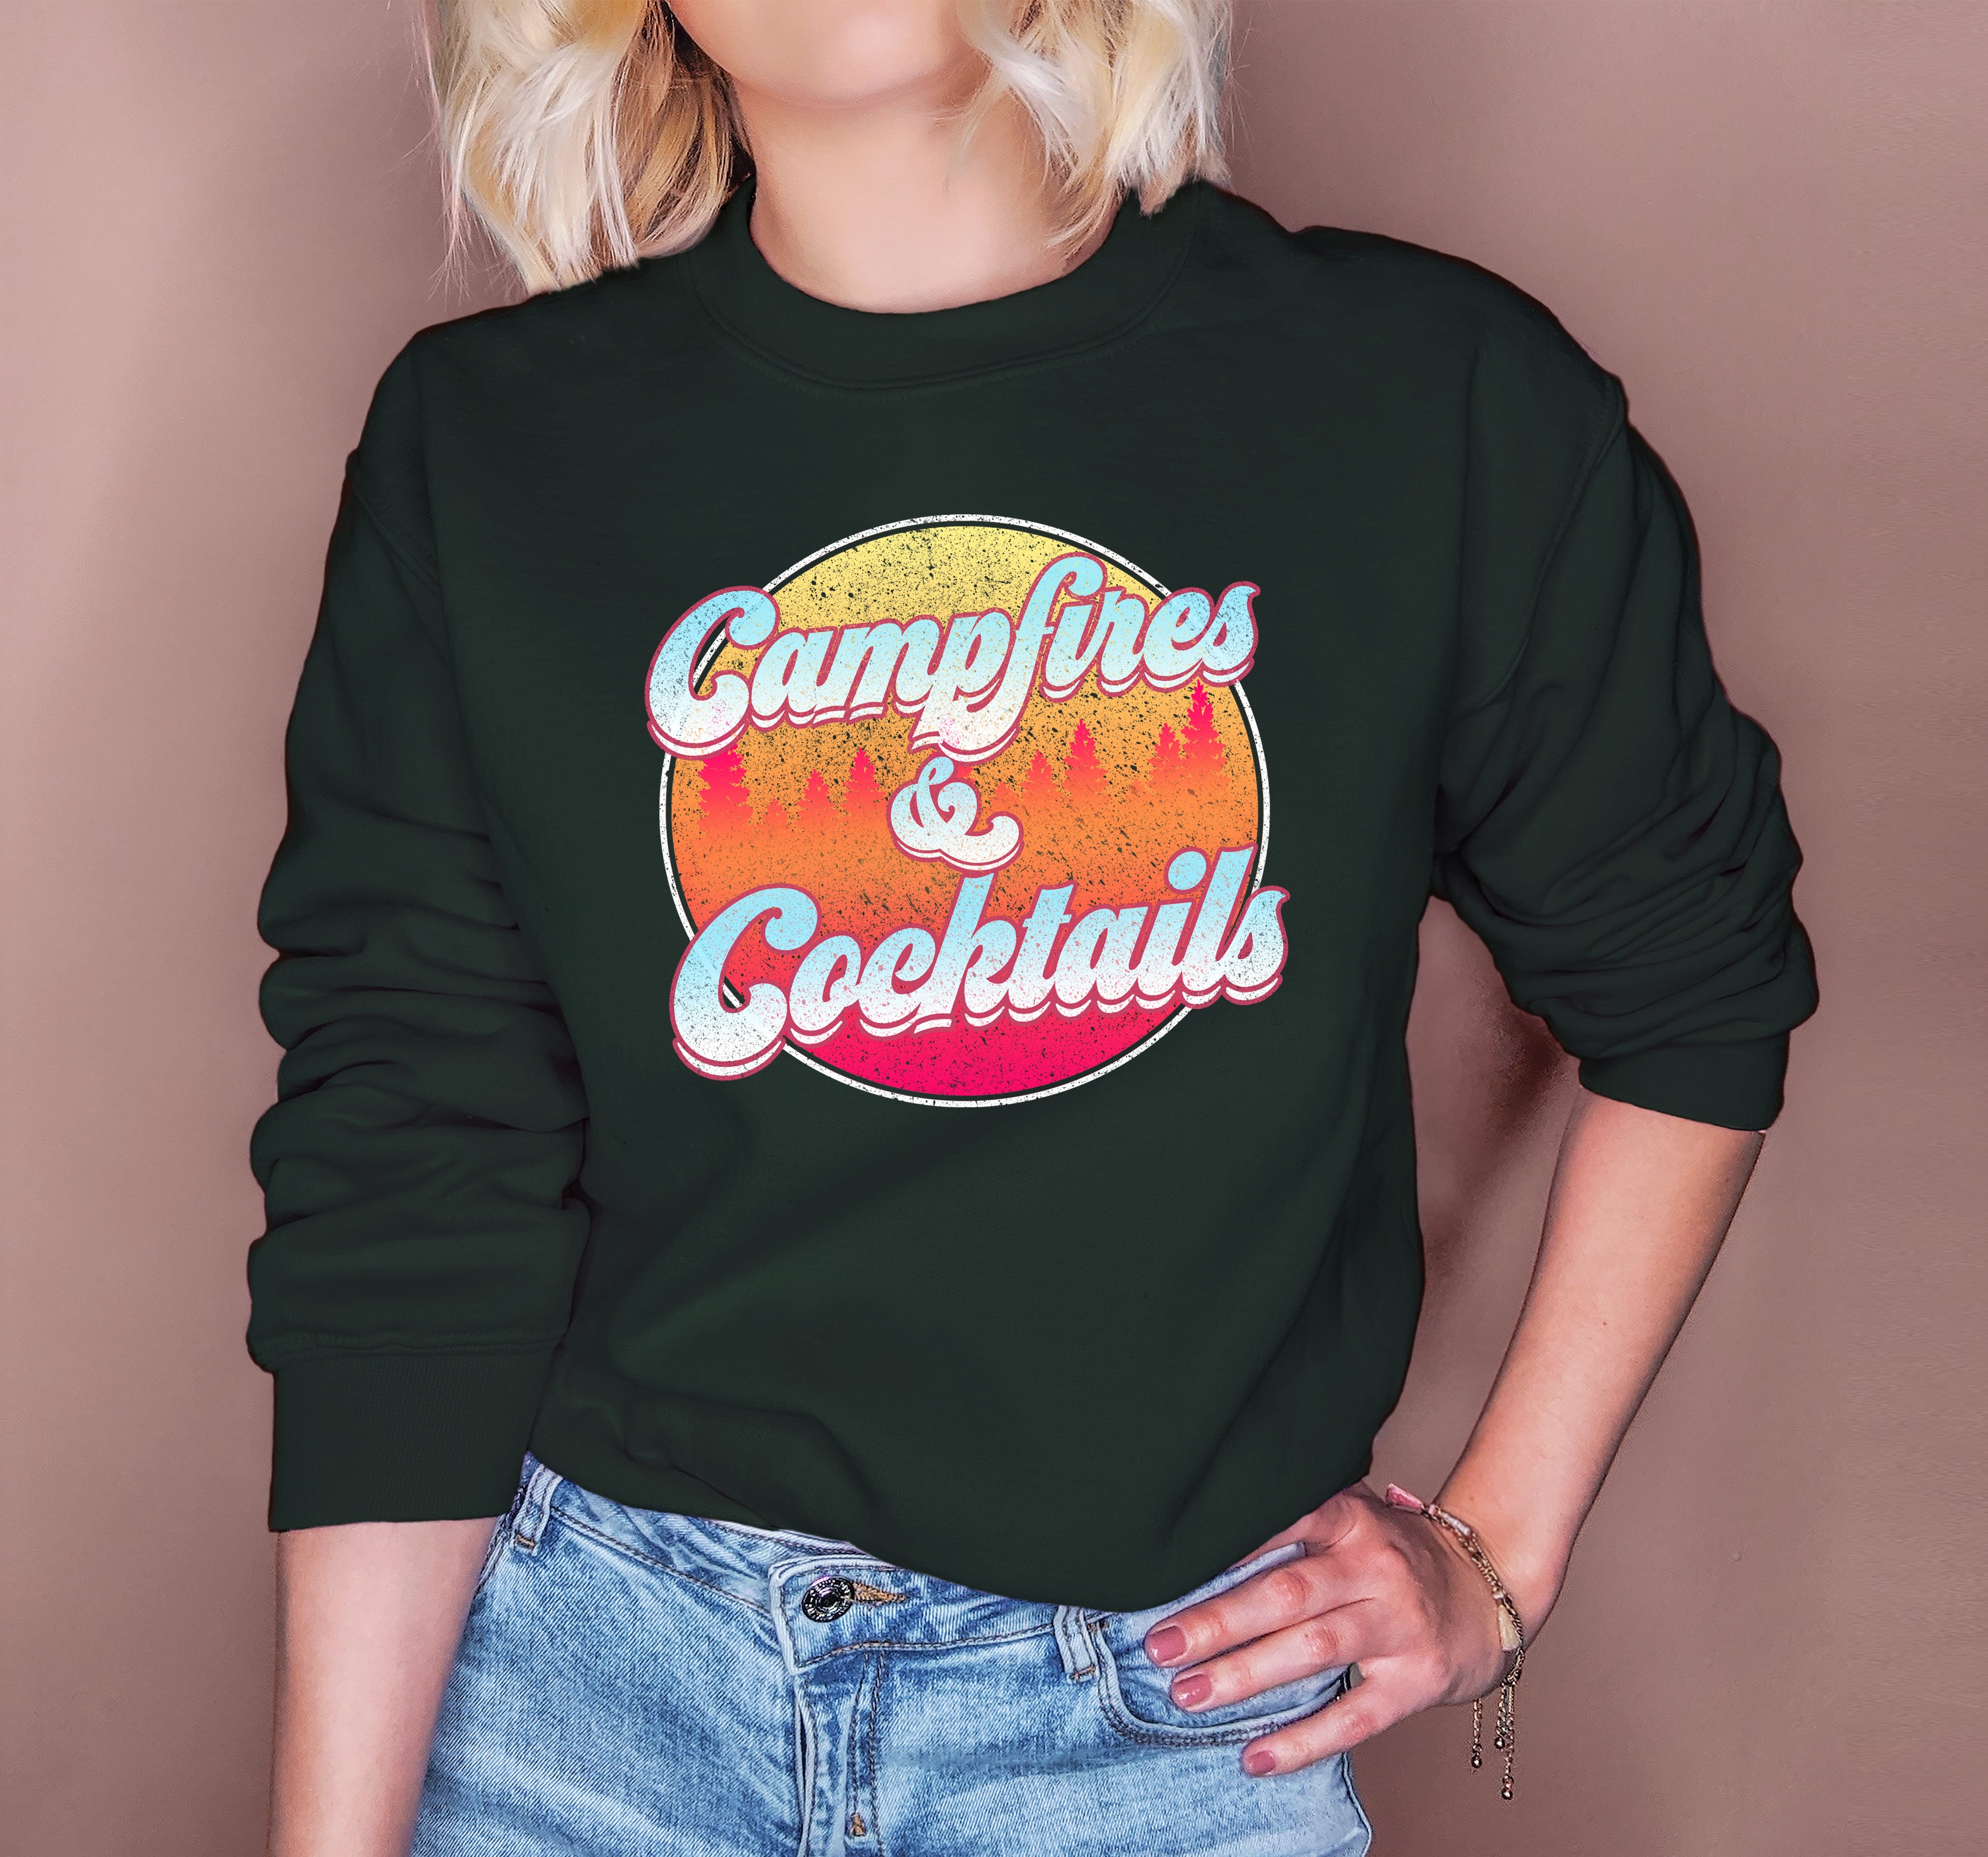 Forest sweatshirt with a retro graphic that says campfires and cocktails - HighCiti